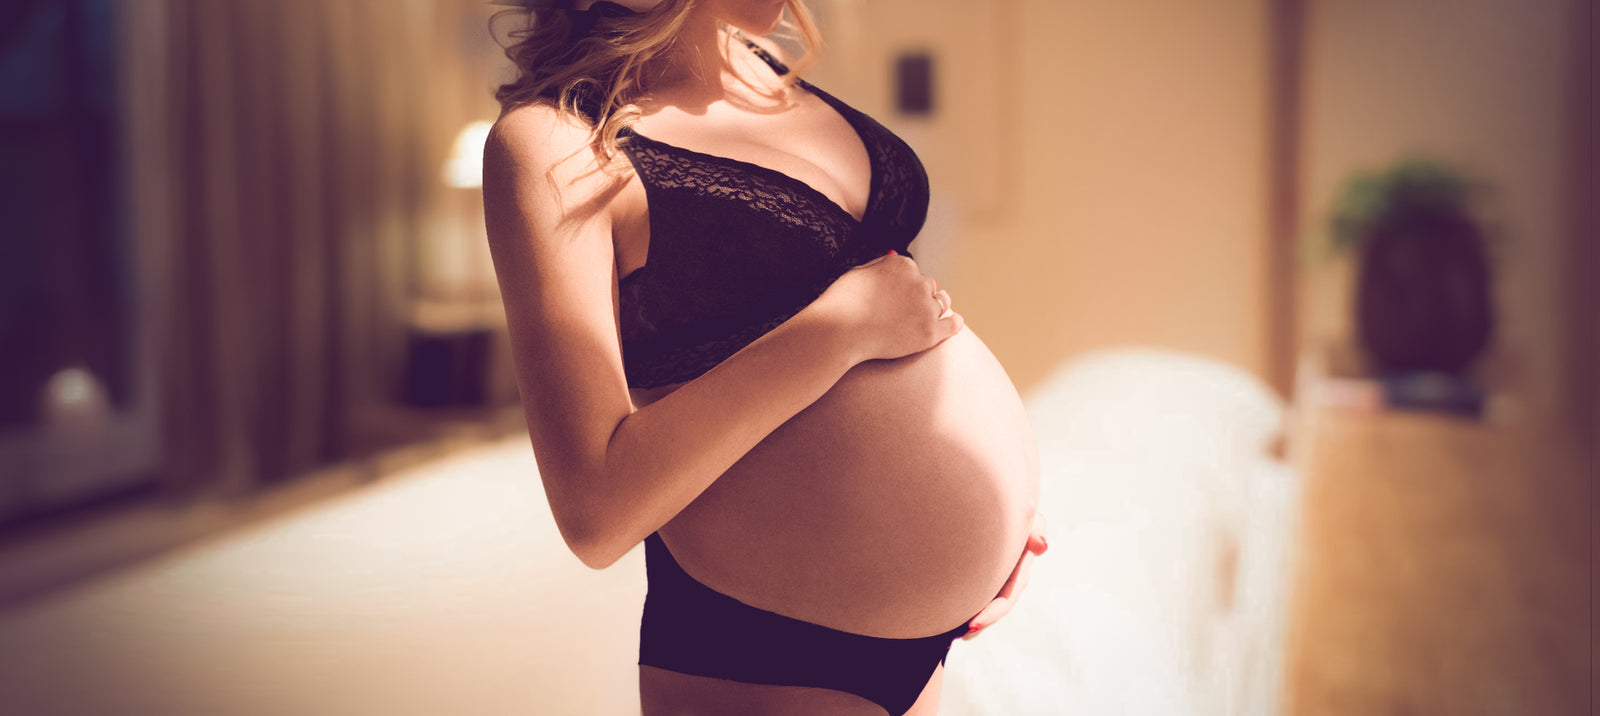 How to Shop and Save Money for Your Changing Body During Pregnancy -  LoveSuze